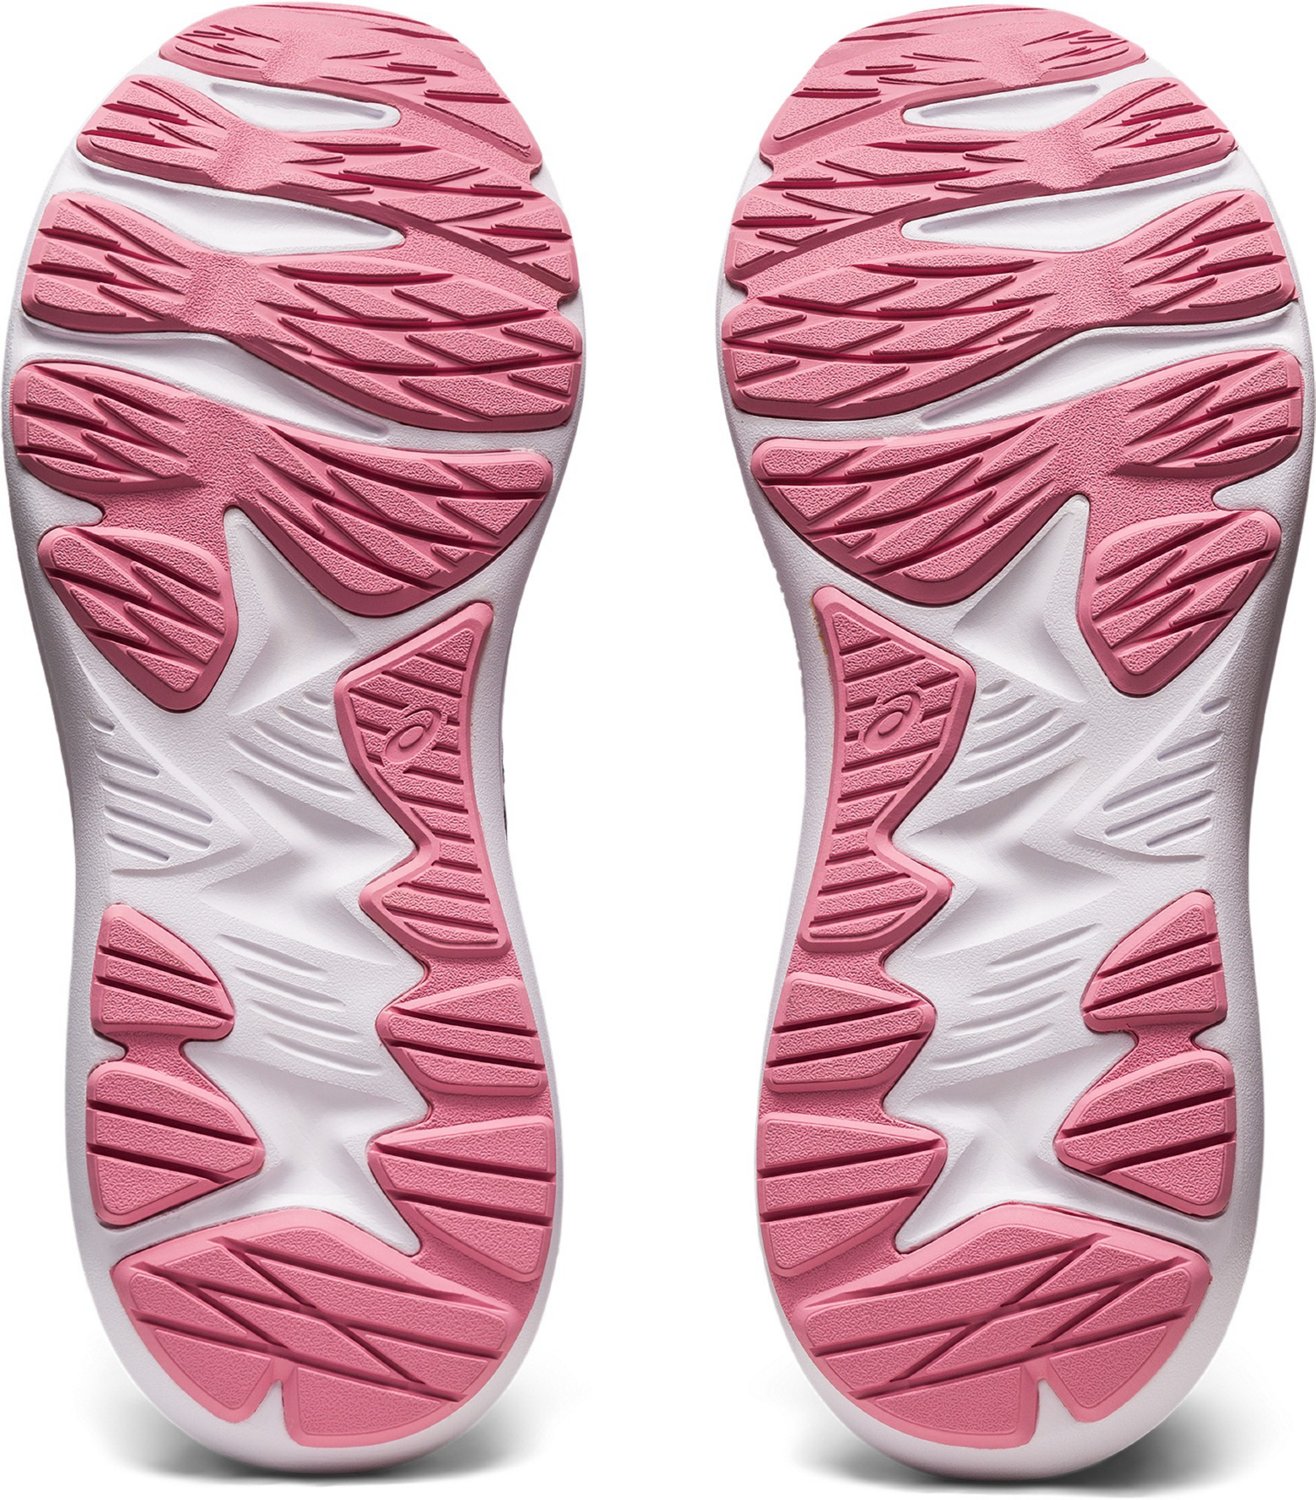 Academy Sports + Outdoors ForEverlast® FlipFlop Over-the-Shoulder